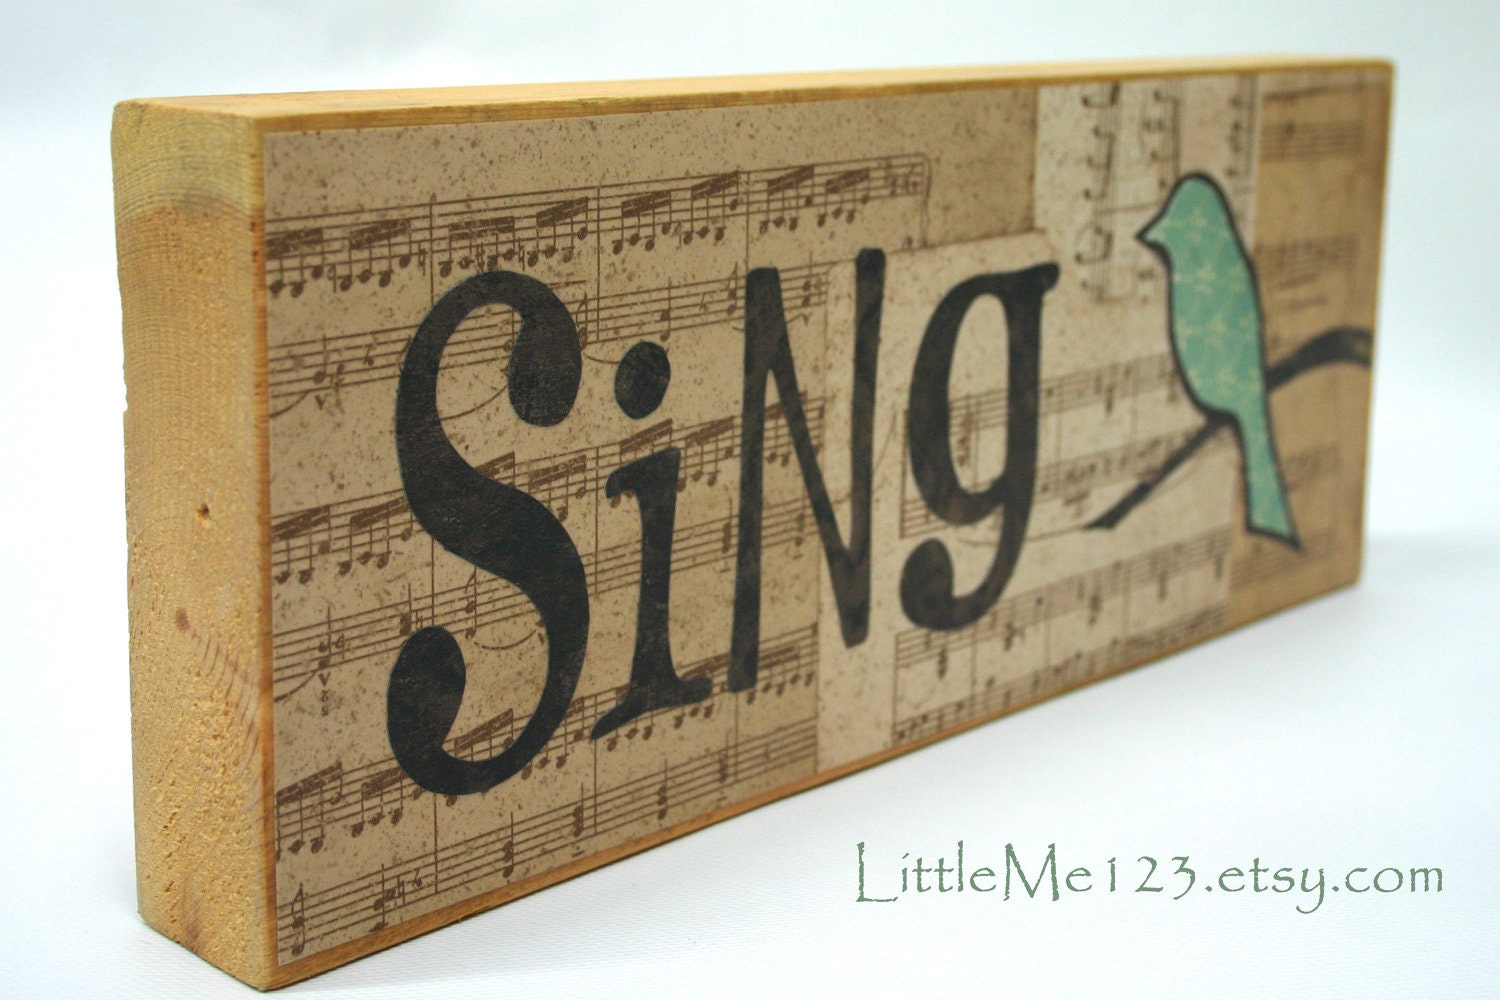 BlockHead Design - Sing Bird Wood Block - Hand Cut Letters - on Etsy - LettersOfLoveDesigns